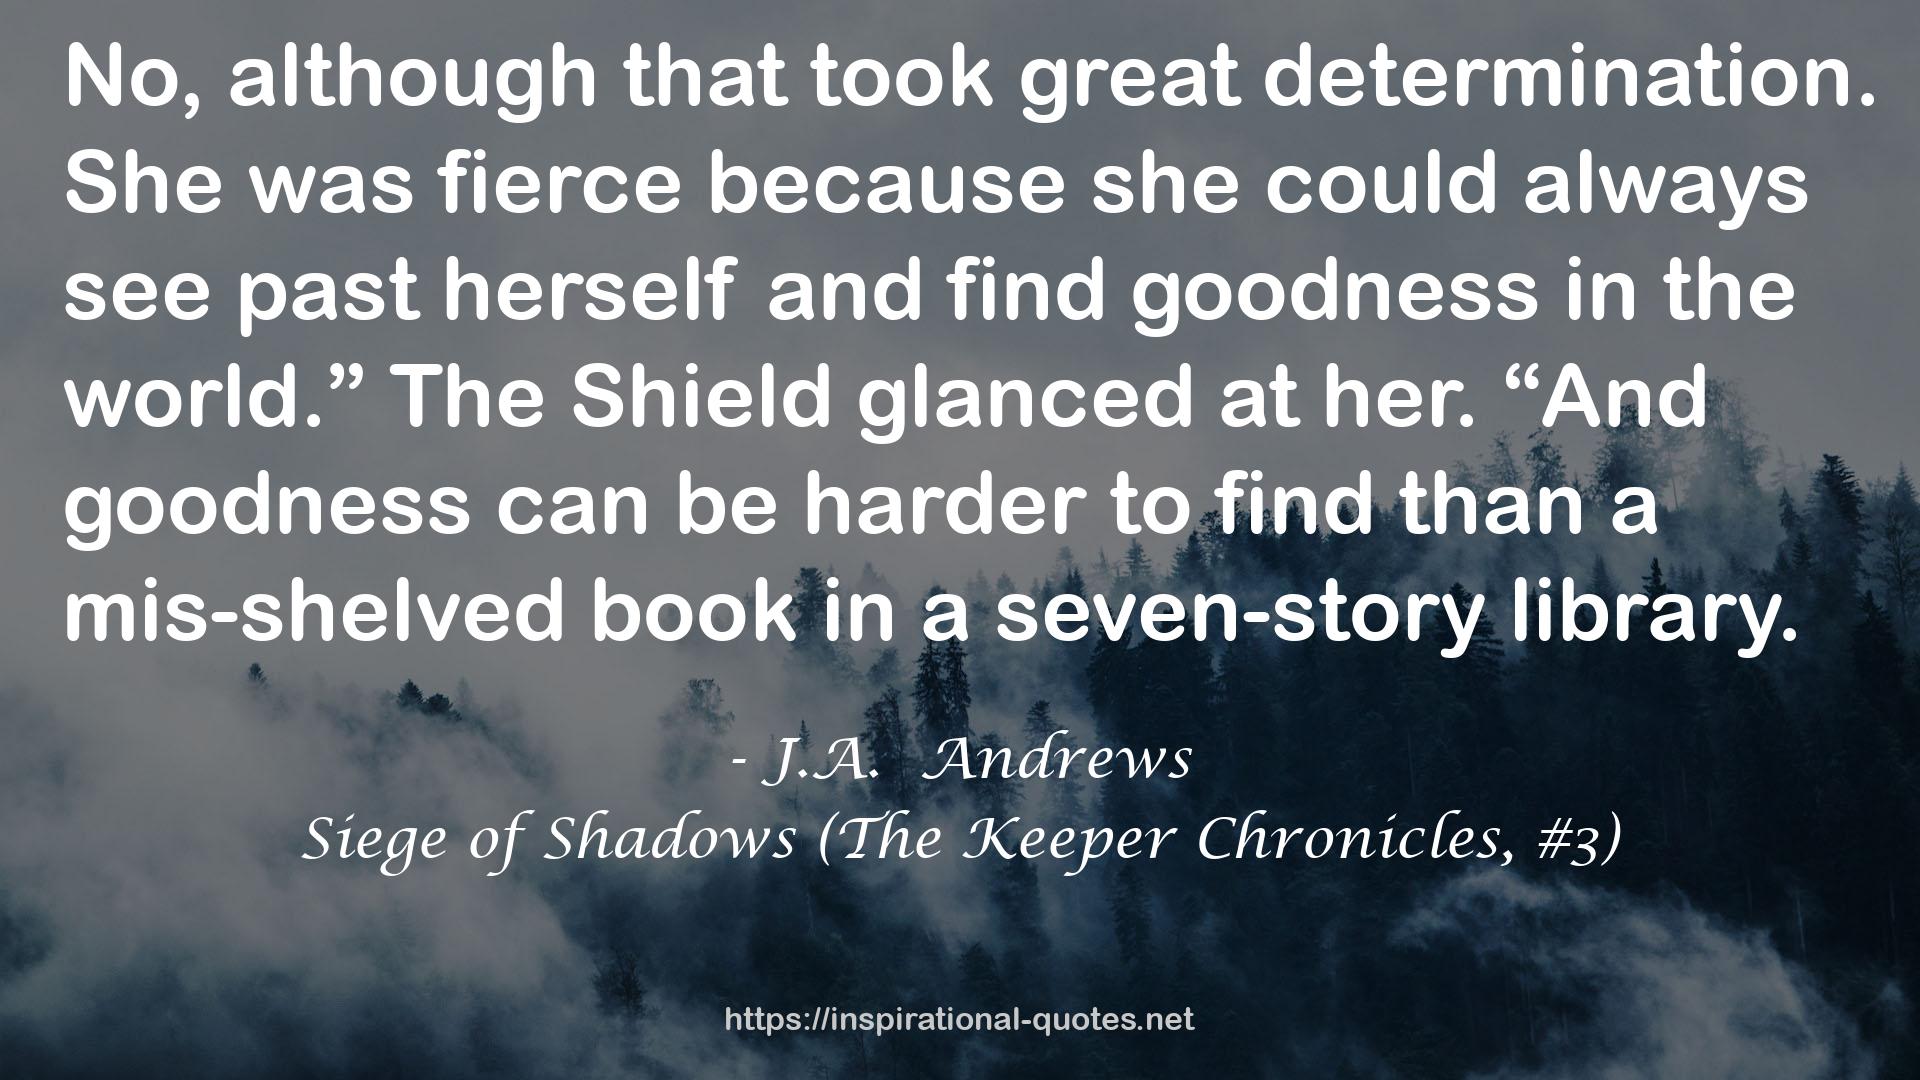 Siege of Shadows (The Keeper Chronicles, #3) QUOTES